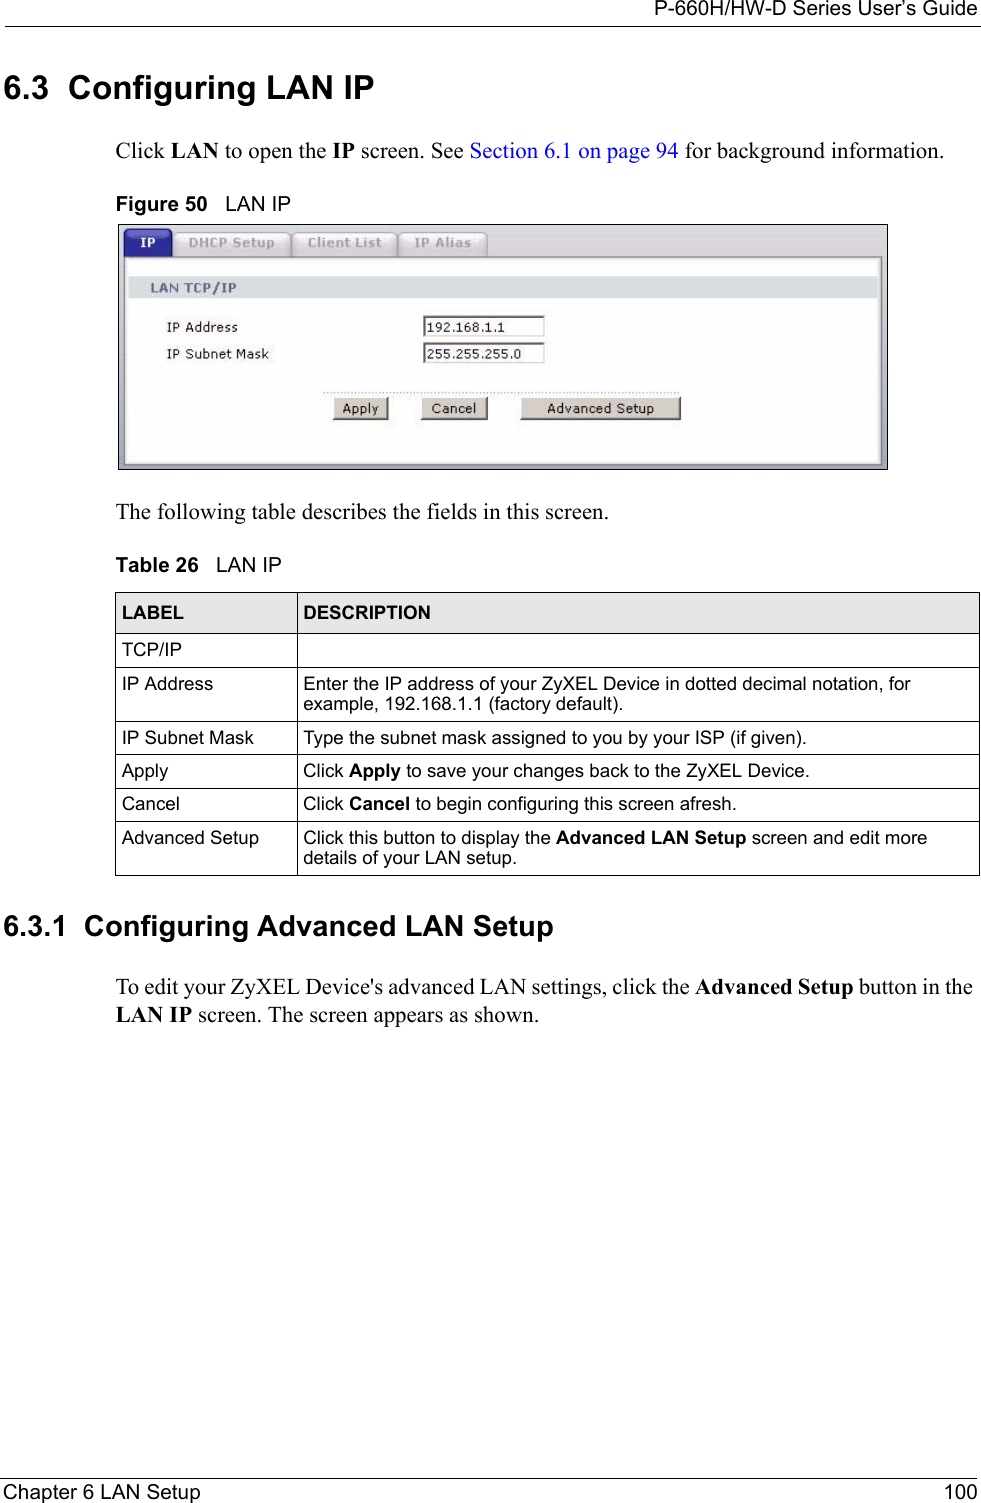 P-660H/HW-D Series User’s GuideChapter 6 LAN Setup 1006.3  Configuring LAN IPClick LAN to open the IP screen. See Section 6.1 on page 94 for background information. Figure 50   LAN IPThe following table describes the fields in this screen.  6.3.1  Configuring Advanced LAN Setup To edit your ZyXEL Device&apos;s advanced LAN settings, click the Advanced Setup button in the LAN IP screen. The screen appears as shown.Table 26   LAN IPLABEL DESCRIPTIONTCP/IPIP Address Enter the IP address of your ZyXEL Device in dotted decimal notation, for example, 192.168.1.1 (factory default). IP Subnet Mask  Type the subnet mask assigned to you by your ISP (if given).Apply Click Apply to save your changes back to the ZyXEL Device.Cancel Click Cancel to begin configuring this screen afresh.Advanced Setup Click this button to display the Advanced LAN Setup screen and edit more details of your LAN setup.